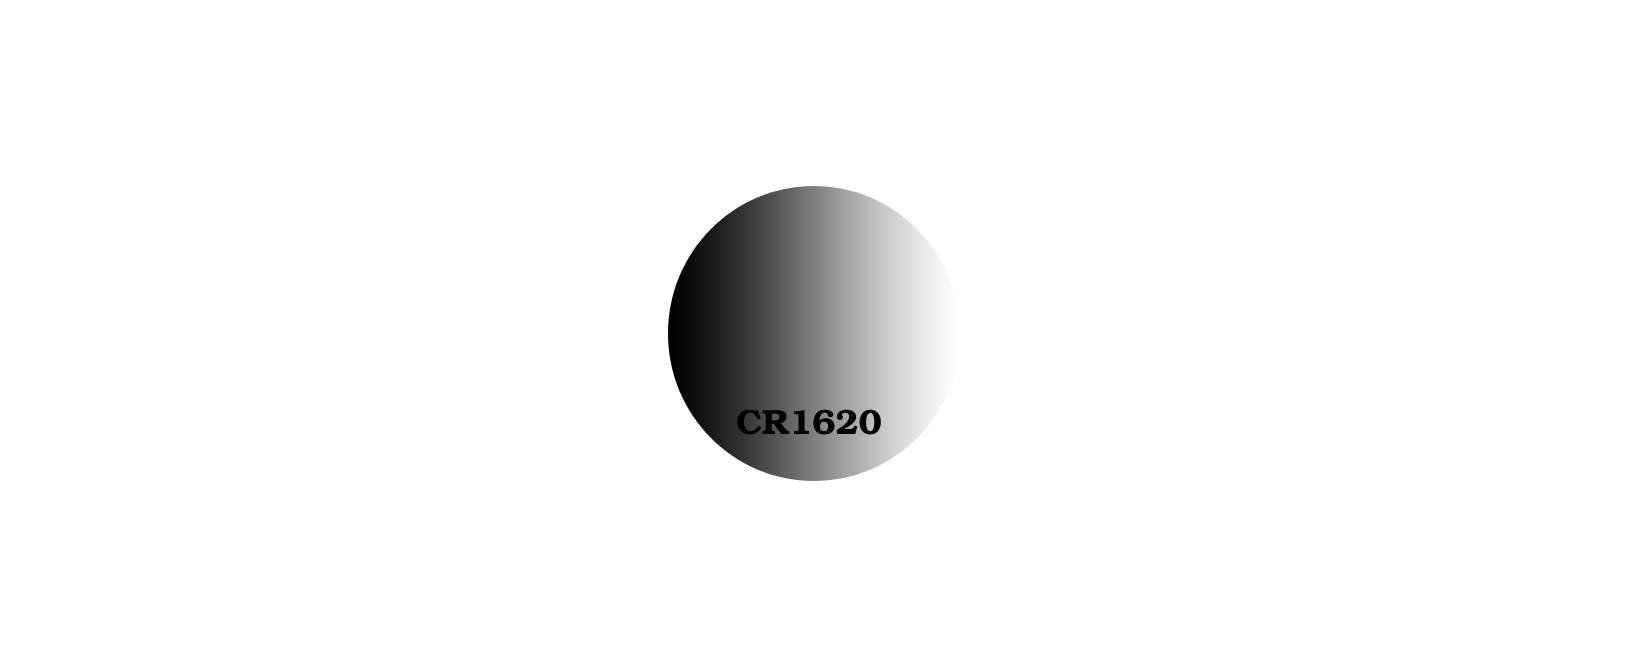 CR1620 Battery Equivalent